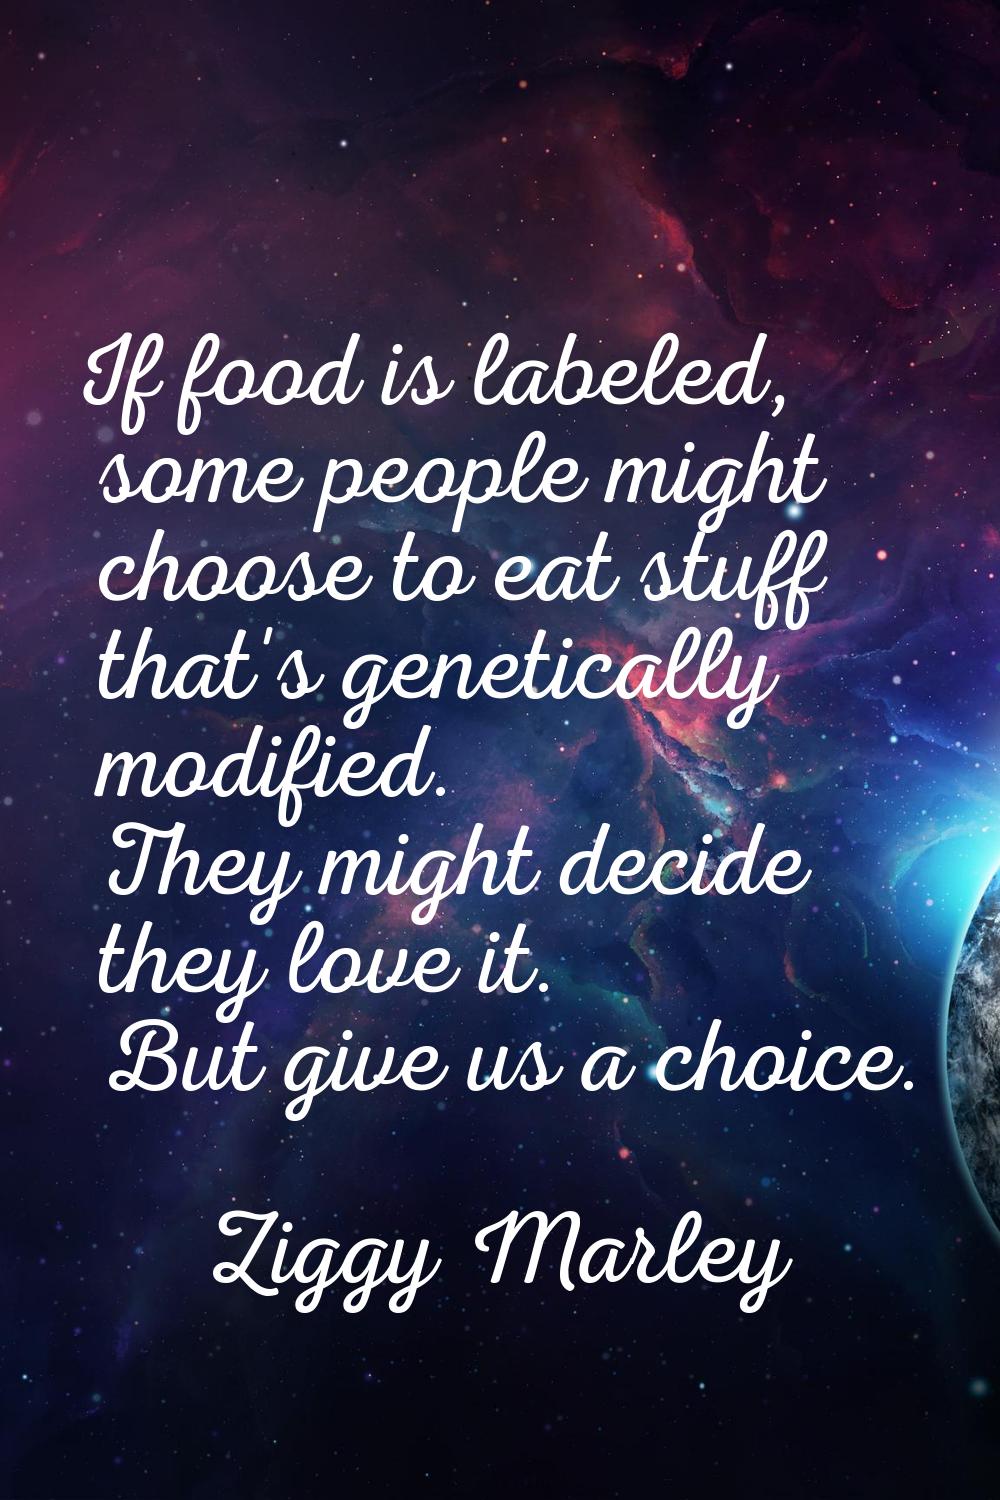 If food is labeled, some people might choose to eat stuff that's genetically modified. They might d